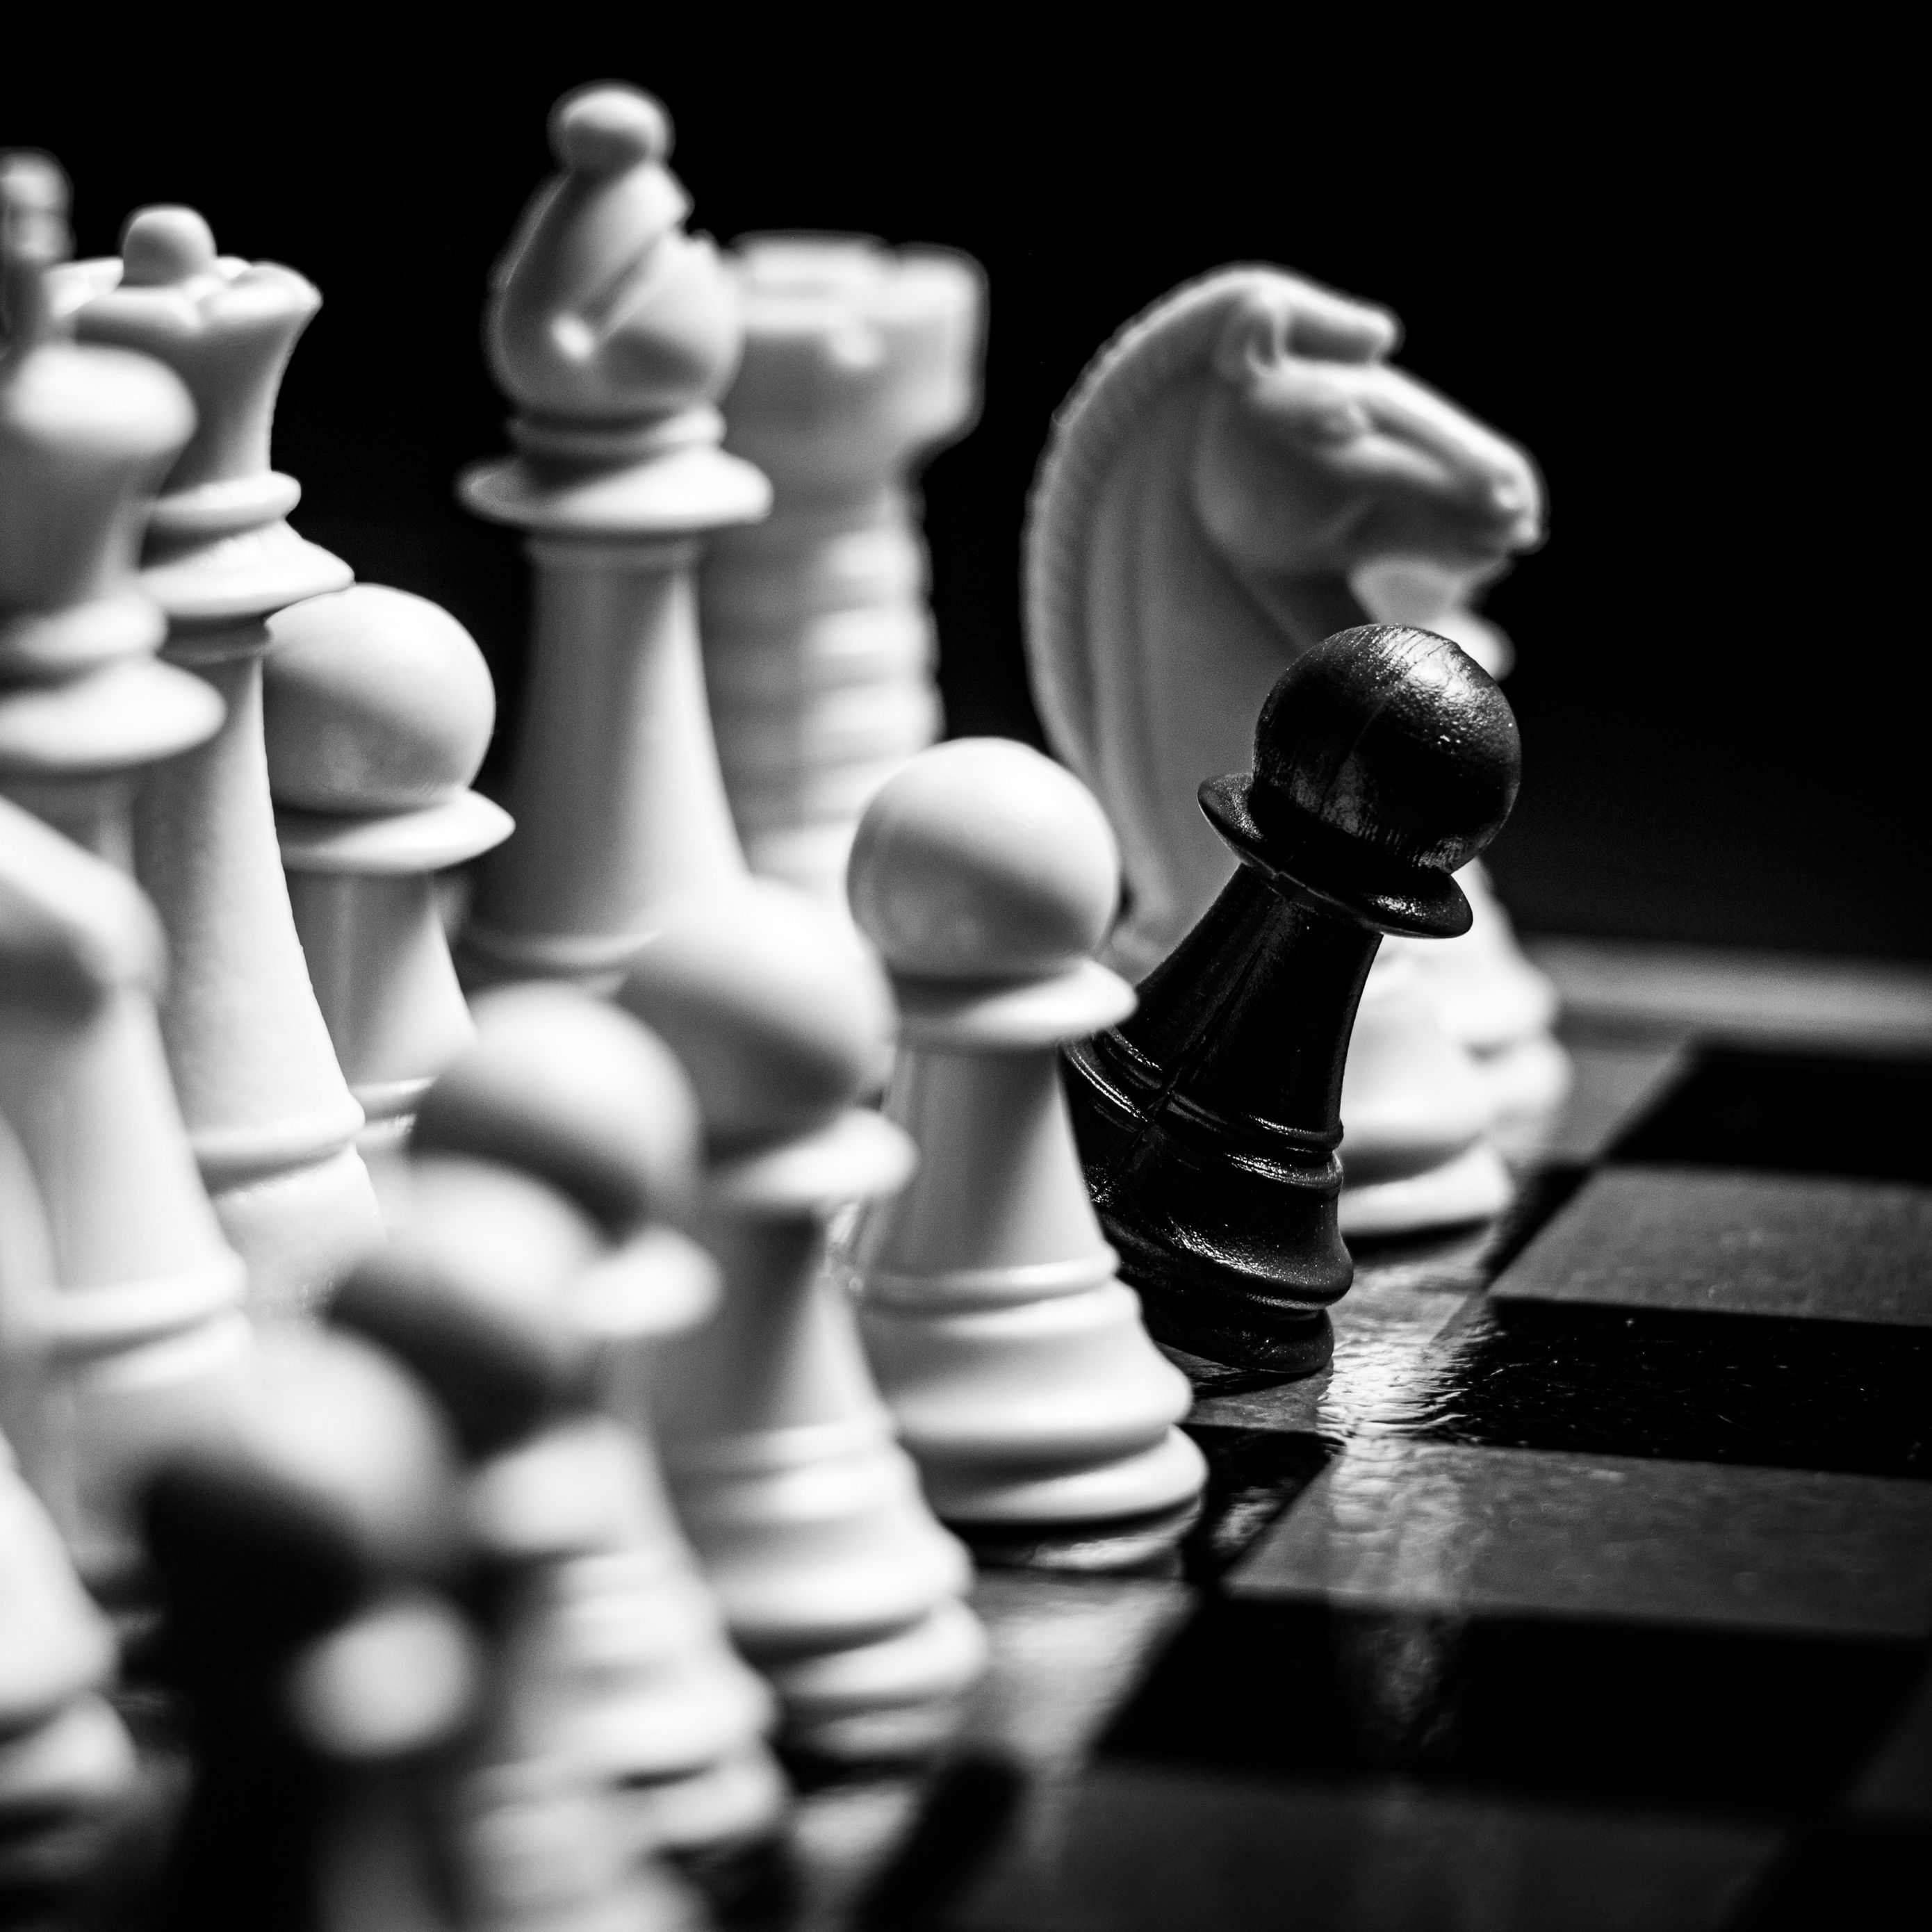 Download wallpaper 2780x2780 chess, pieces, board, game, games ipad air, ipad air ipad ipad ipad mini ipad mini ipad mini ipad pro 9.7 for parallax HD background